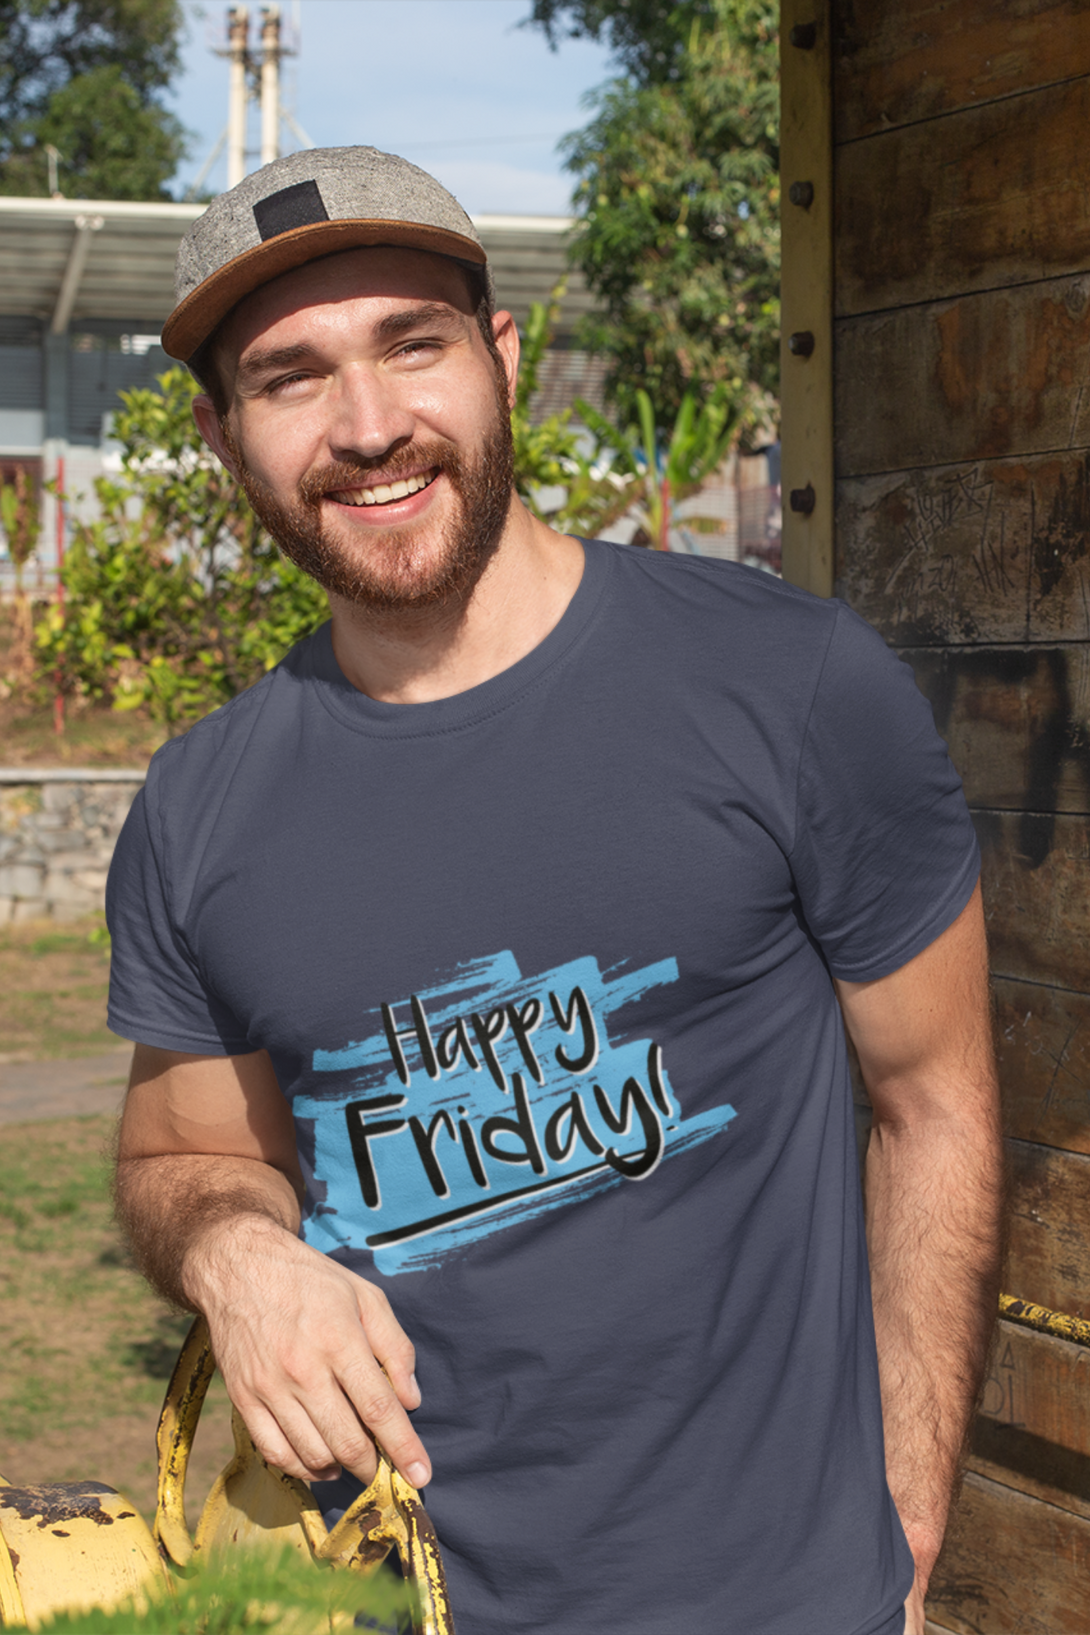 Happy Friday Printed T-Shirt For Men - WowWaves - 7